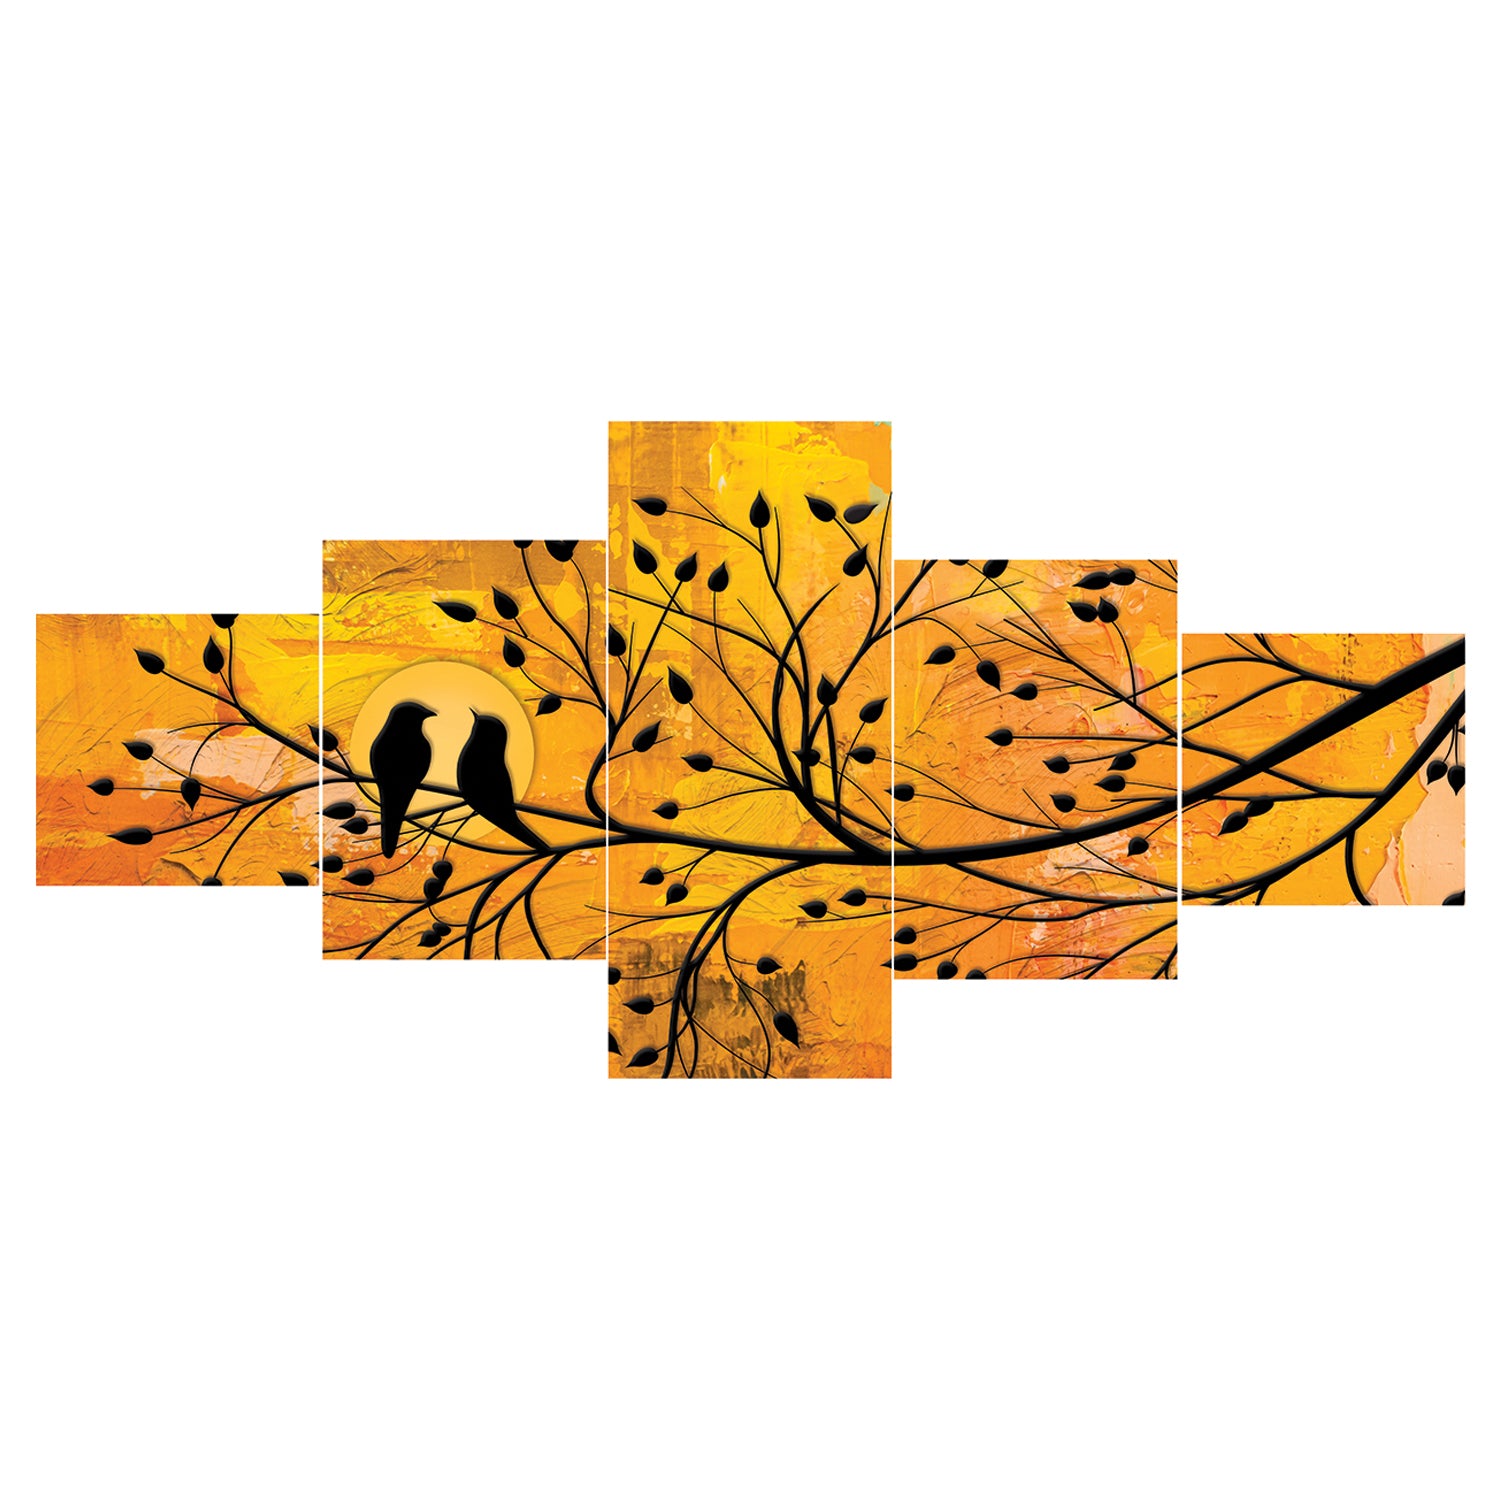 Set of 5 Birds Couple Sitting on Tree Branch Premium Sunboard Panels Painting